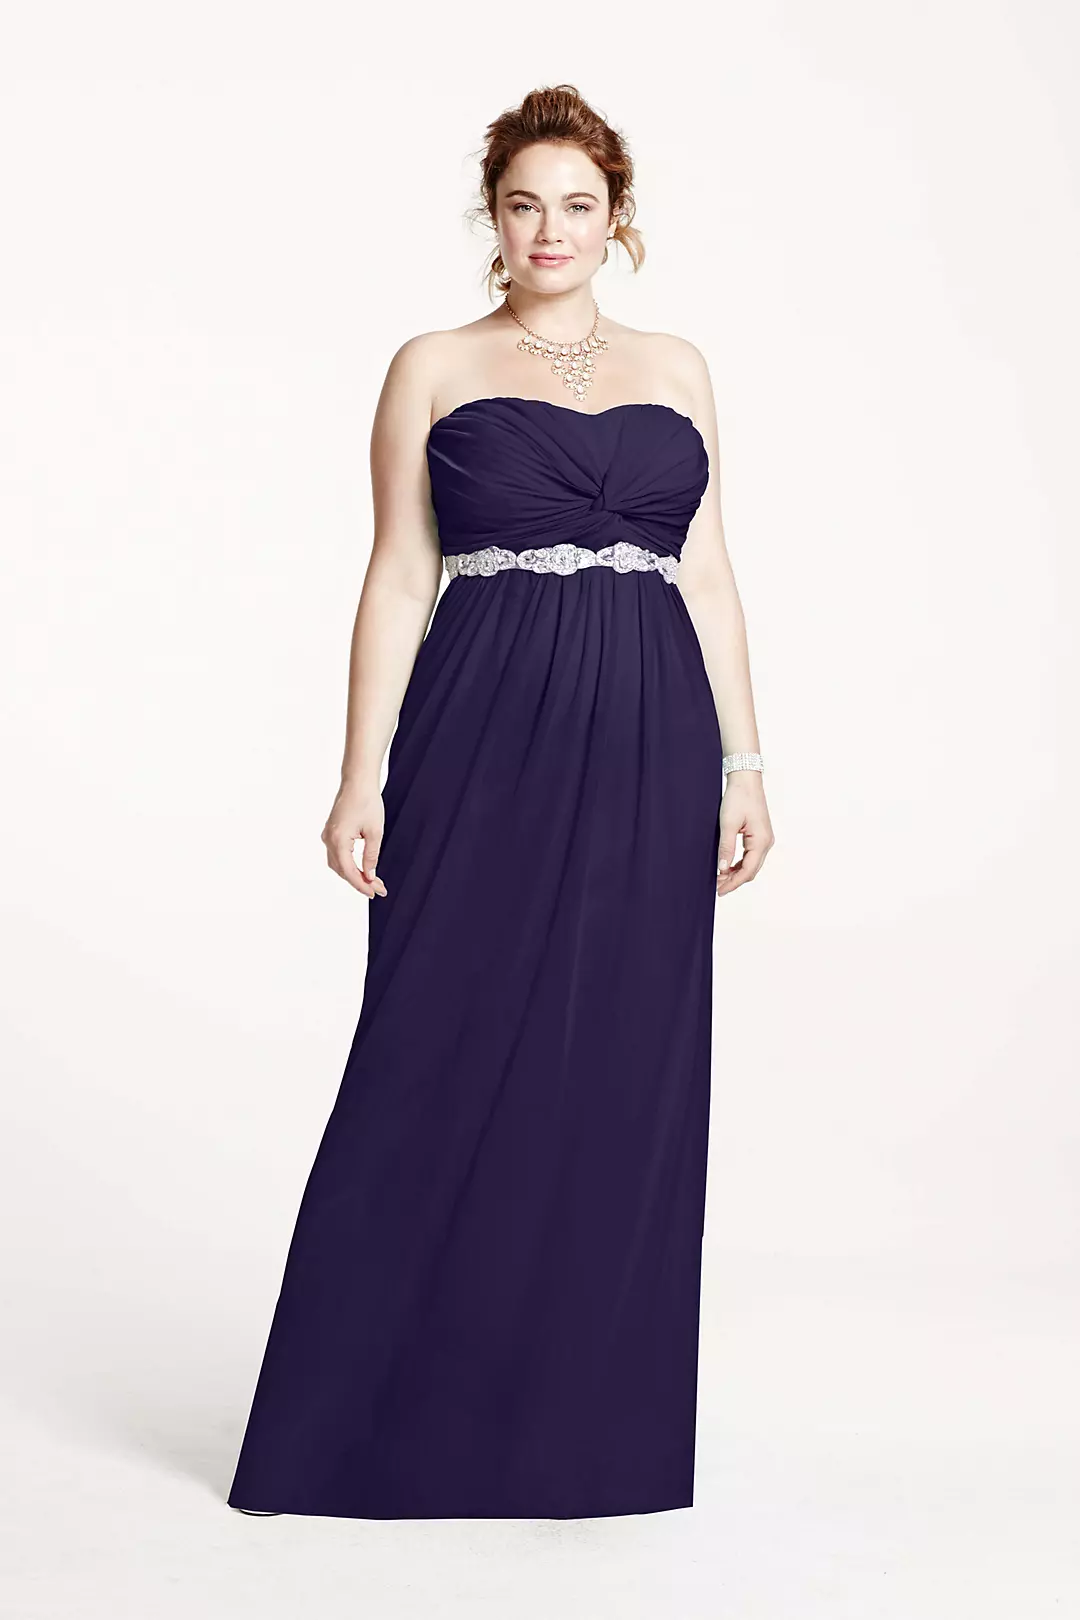 Strapless Prom Dress with Beading and Ruched Bust Image